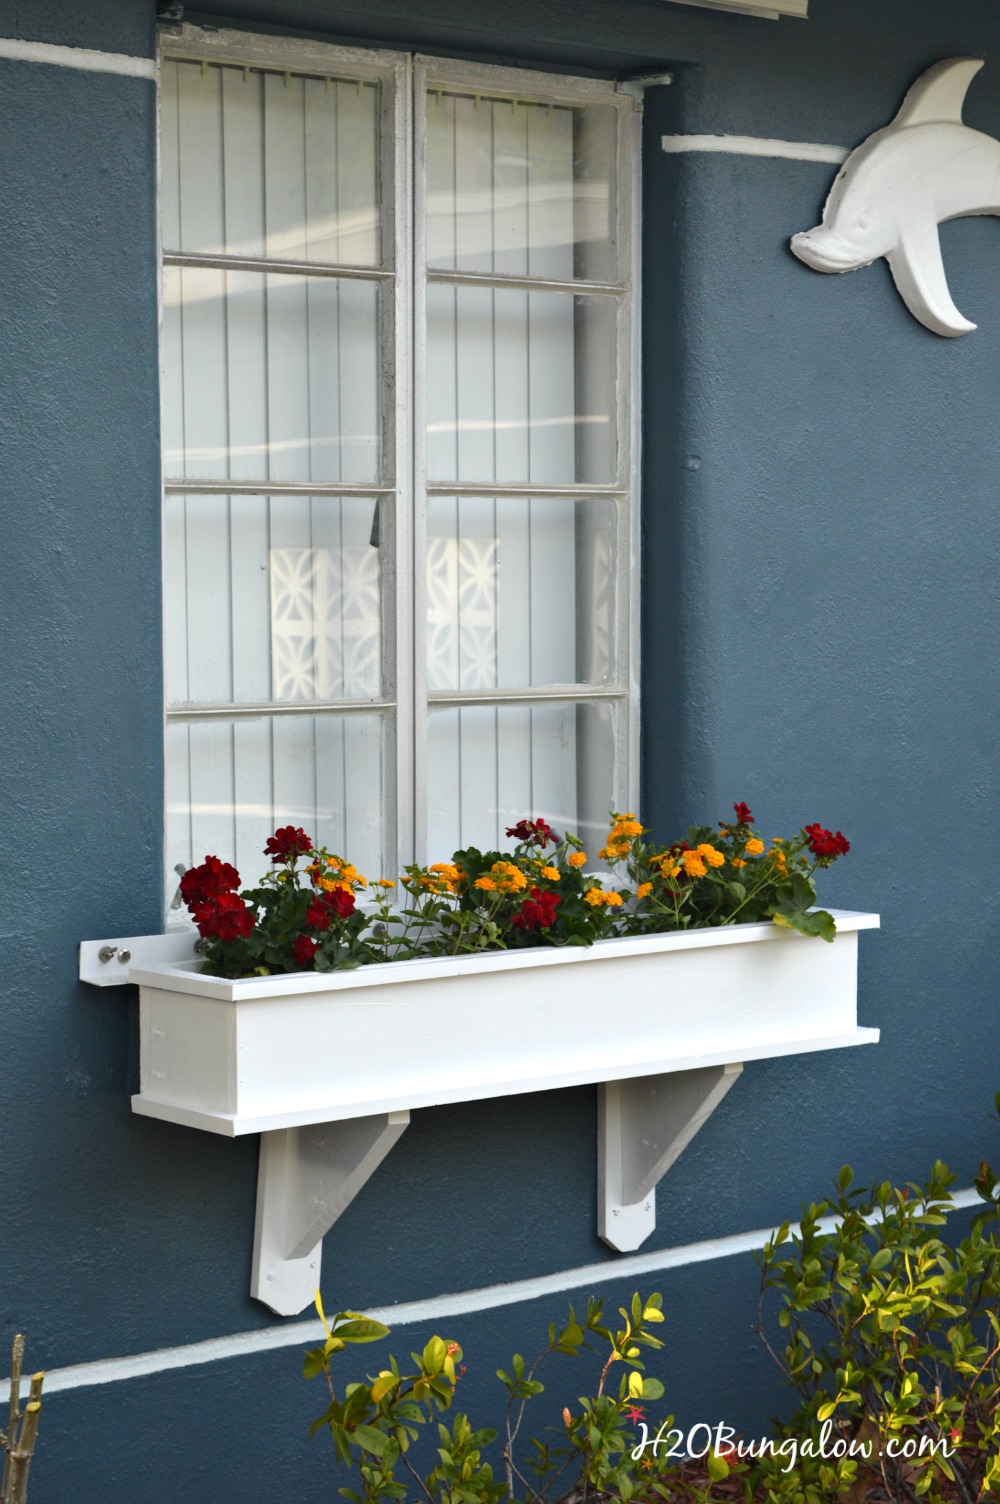 How to build a flower box planter tutorial for the new woodworker. Easy to follow building plans. Make this window box and get instant curb appeal.